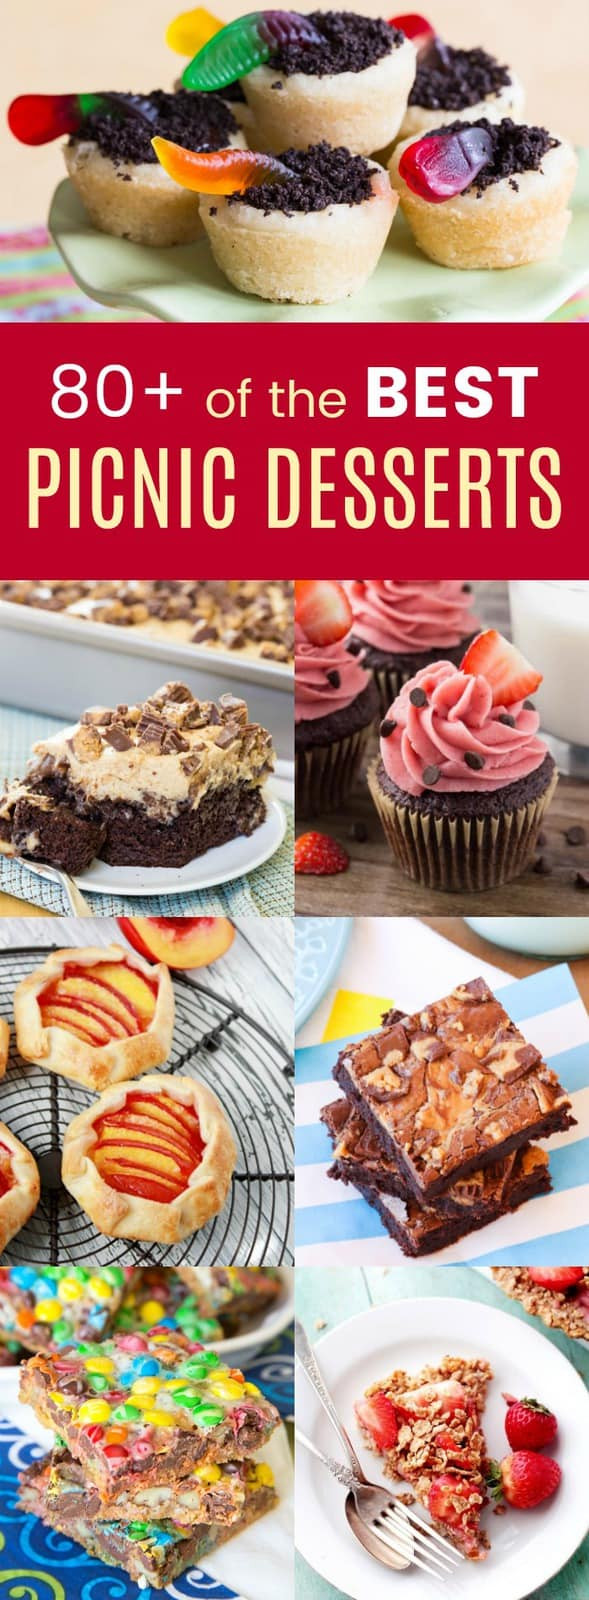 Summer Desserts For Picnics
 Over 80 Recipes for Picnic Desserts Cupcakes & Kale Chips